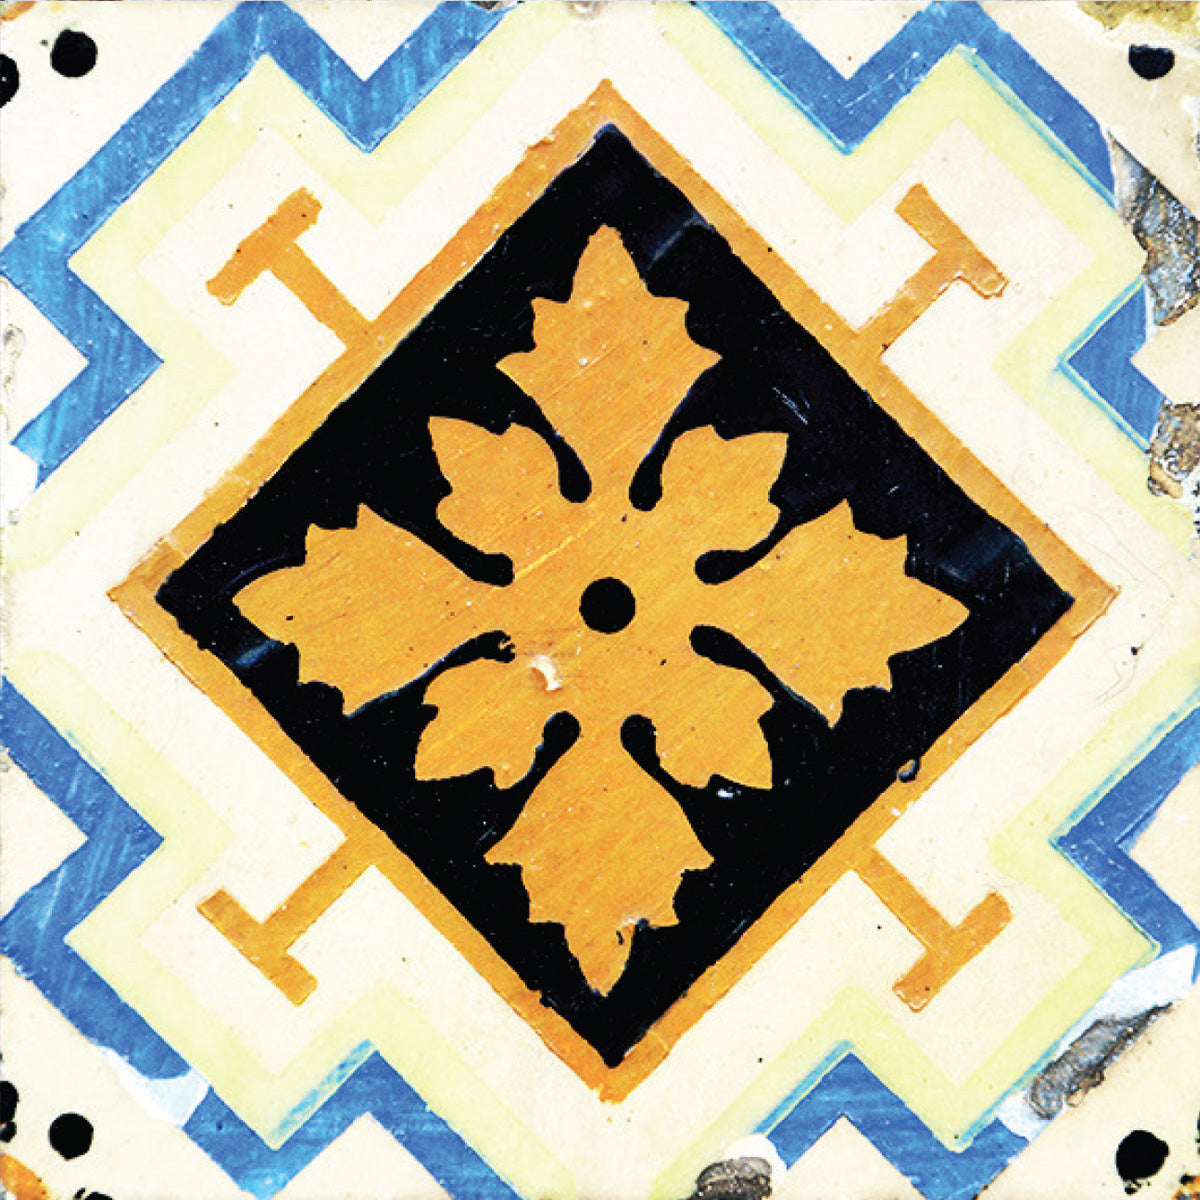 8" x 8" Gold Snowflake Peel and Stick Removable Tiles